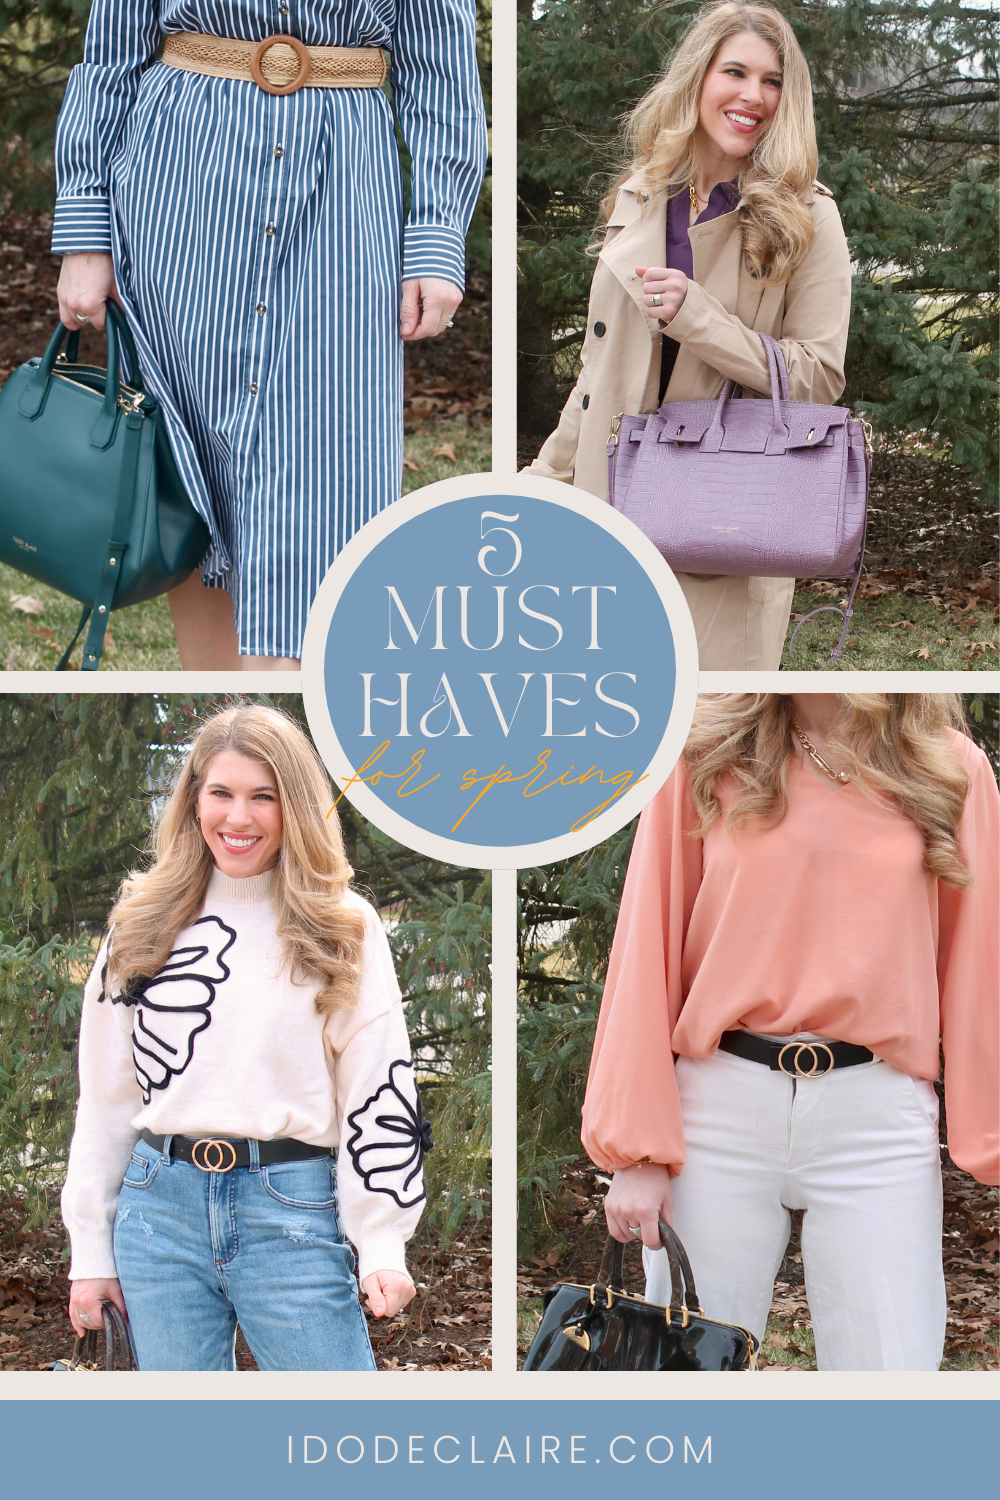 5 mUSt Have Items for Spring from Universal Standard